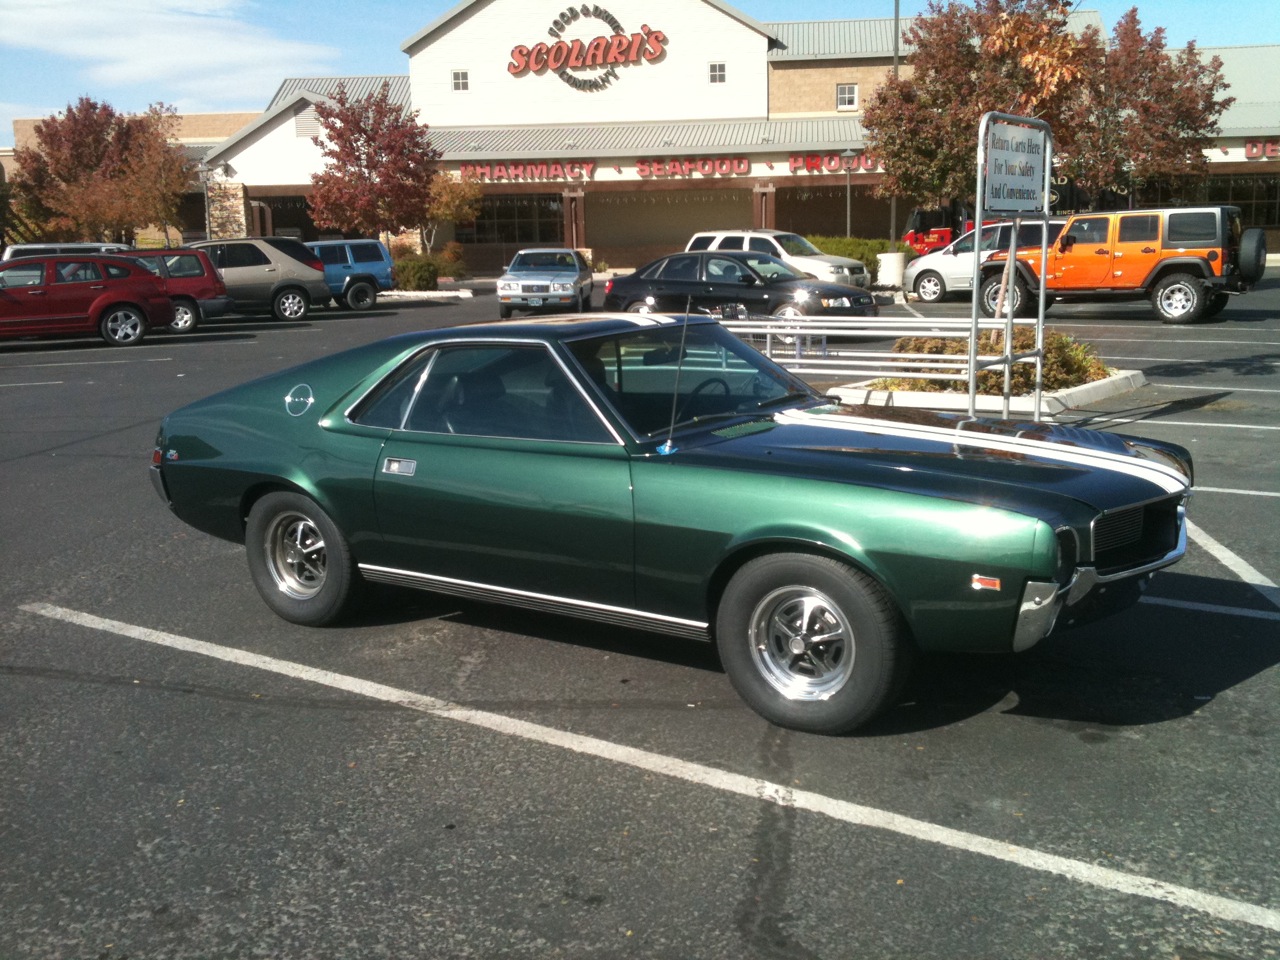 Attached picture 6902129-AMX3.JPG